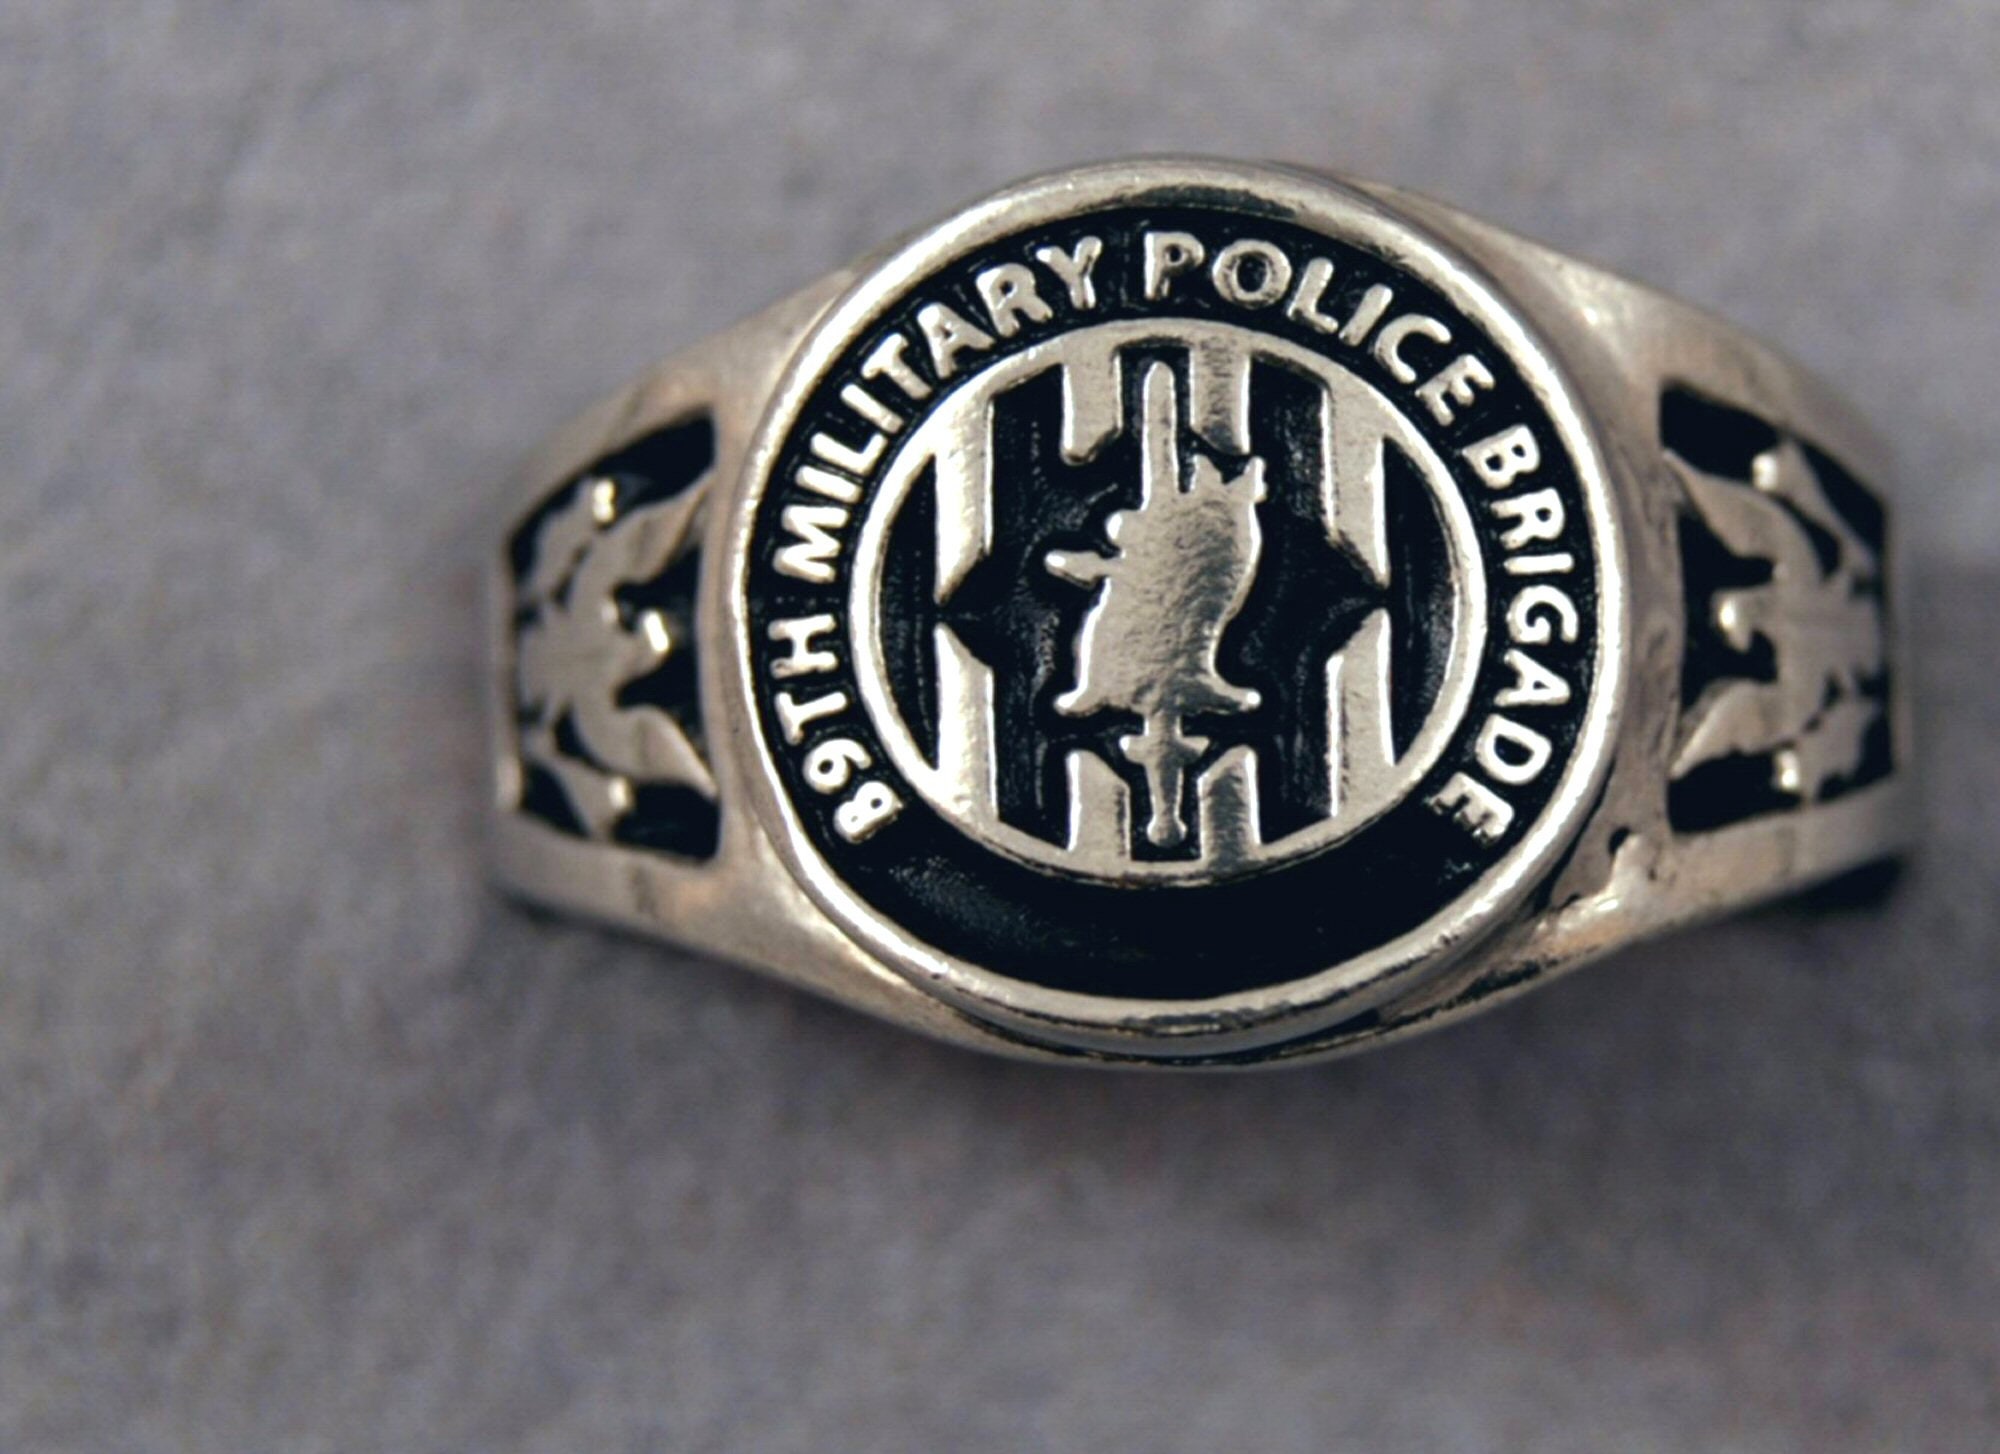 MILITARY POLICE - MP - MENS RING. SIZE 8.5, US ARMY - Green - Vietnam War -  R.13 | eBay